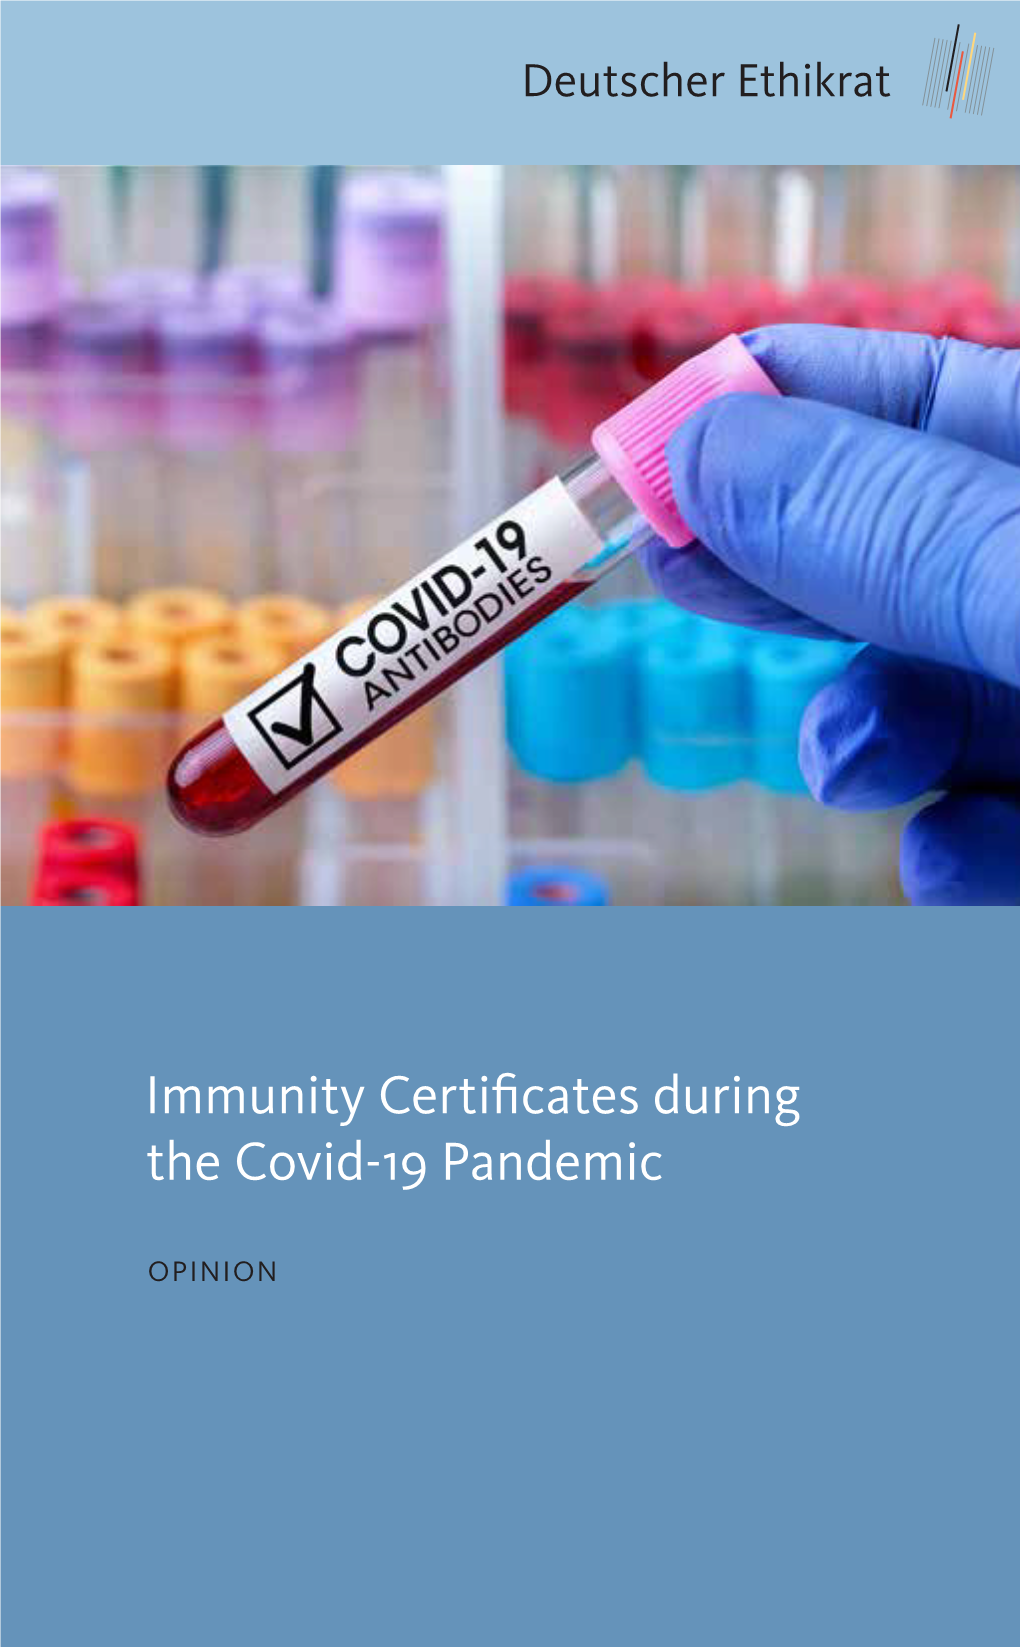 Immunity Certificates During the Covid-19 Pandemic